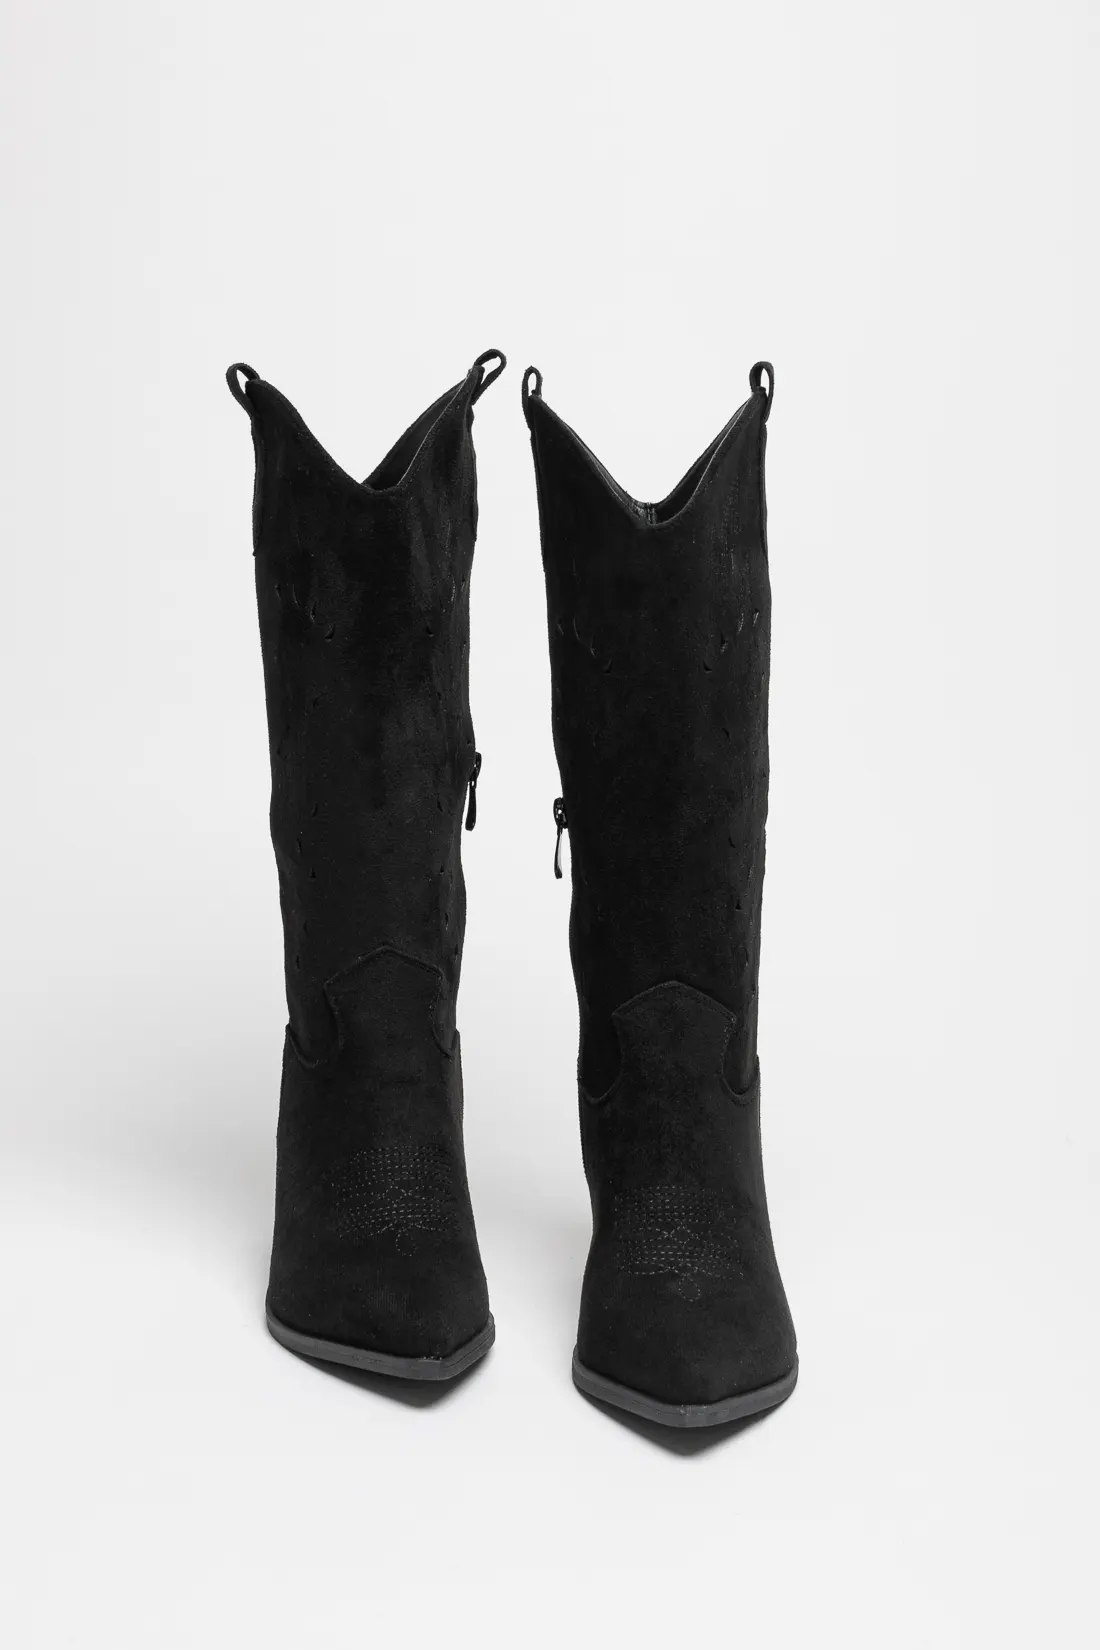 BOTTES RODERY COUNTRY - NOIR